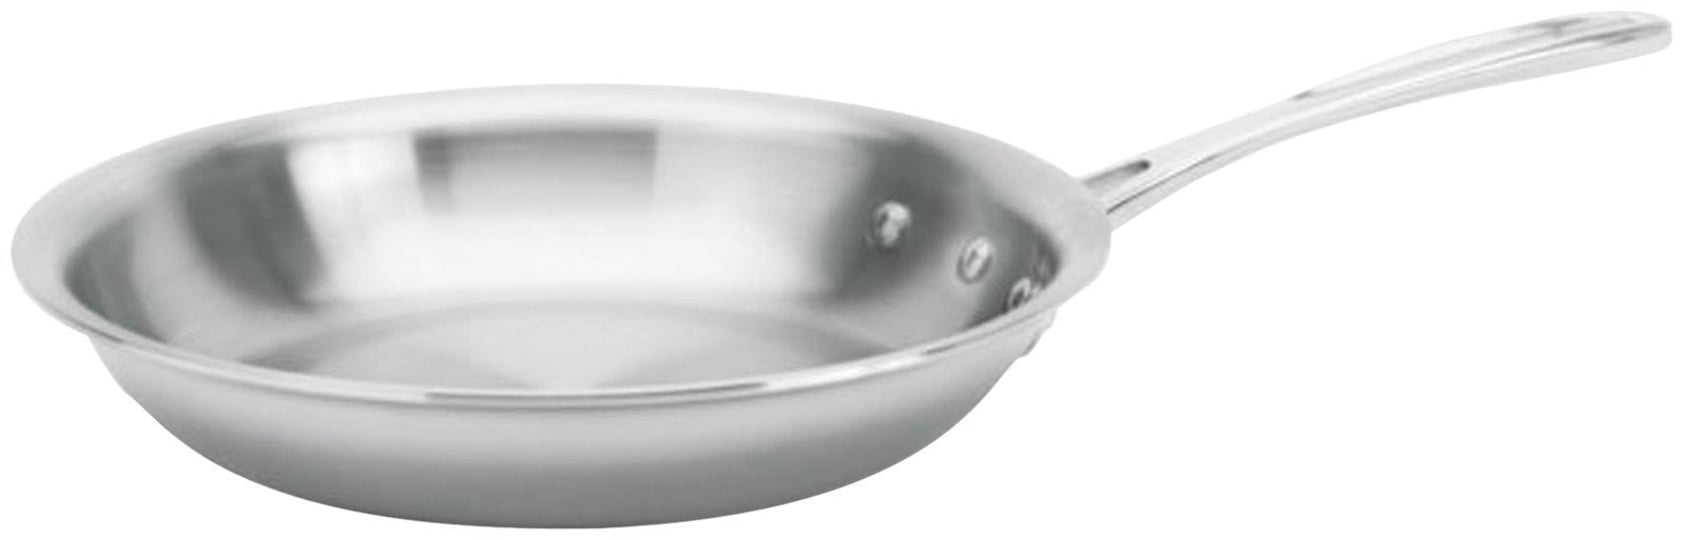 calphalon-omelet-pan-tri-ply-stainless-steel-8-1